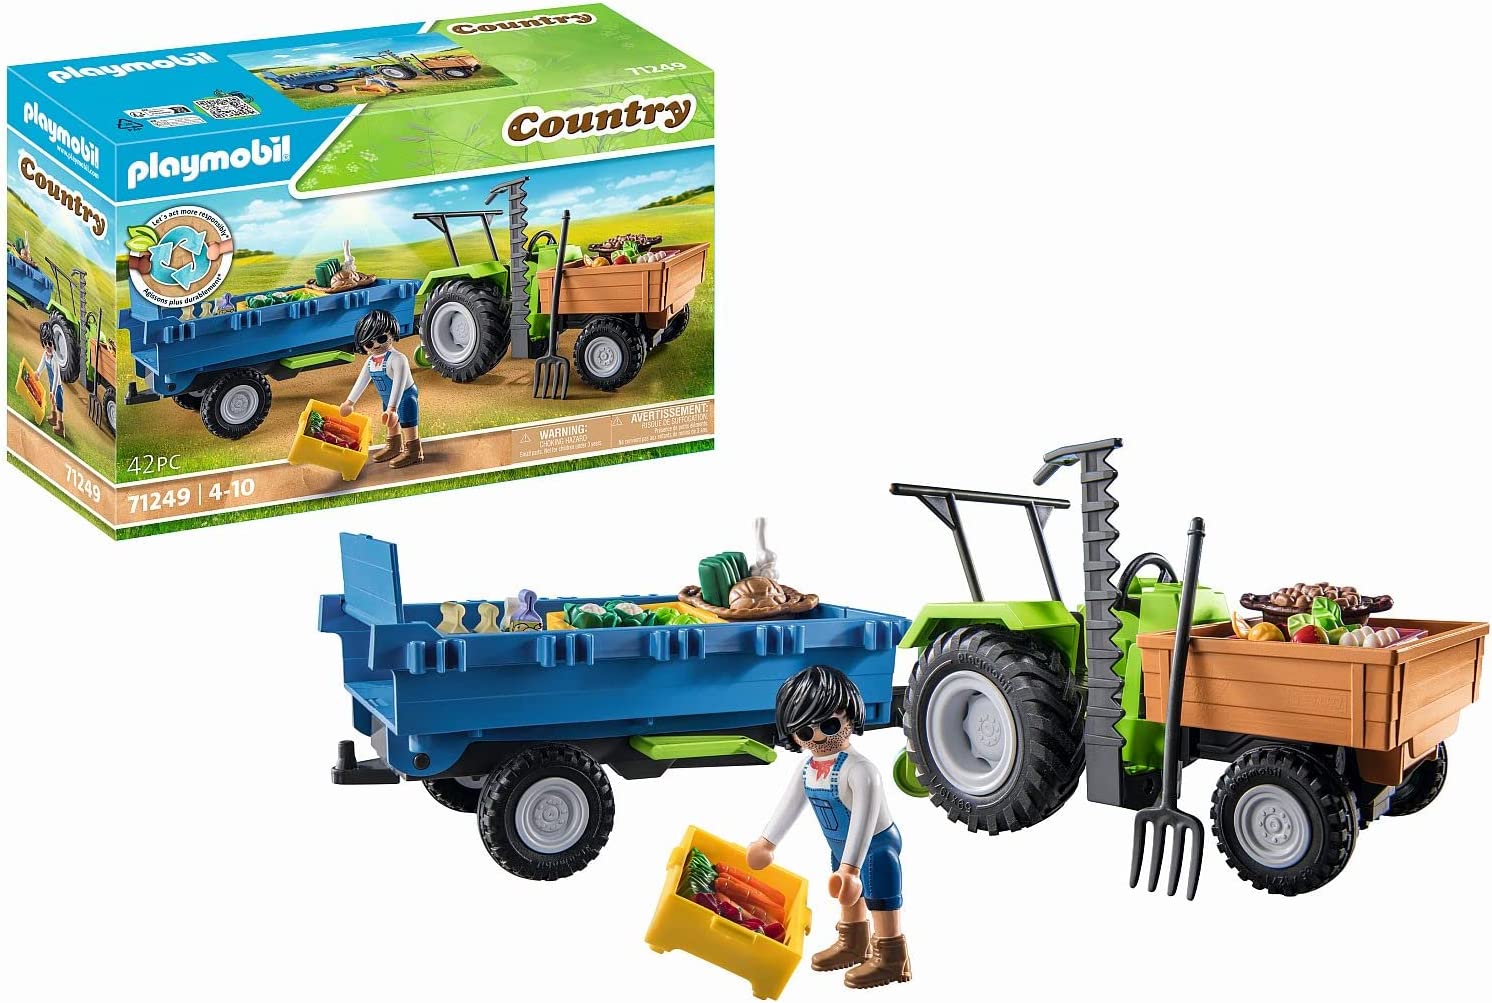 Playmobil Country 71249 Tractor with Trailer and Transport Boxes, Green Tractor for Organic Farm, Sustainable Toy for Children from 4 Years